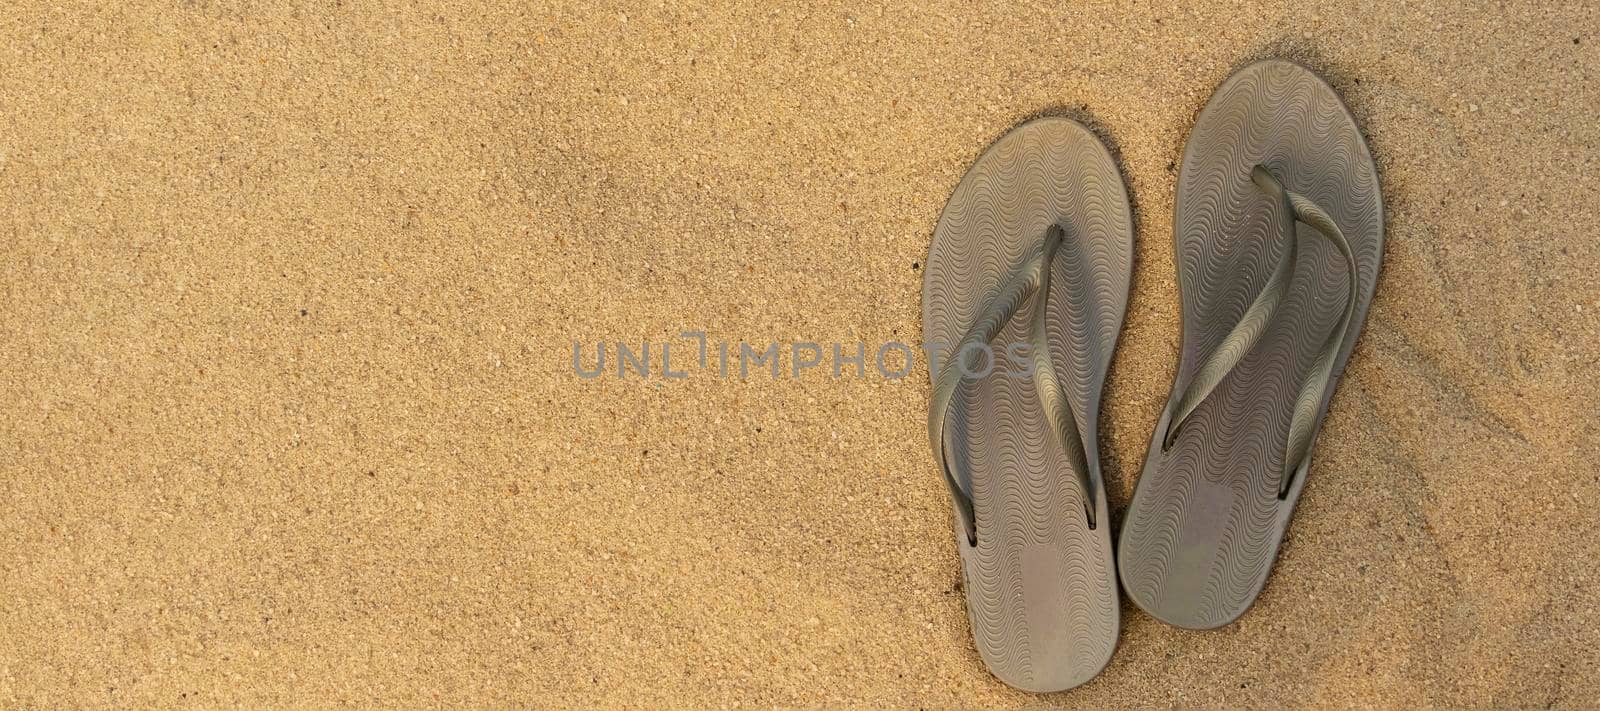 banner with light sandal or flip flops on the beach. golden sand. place for your text. top view. flat lay. concept of summer and vacation at sea